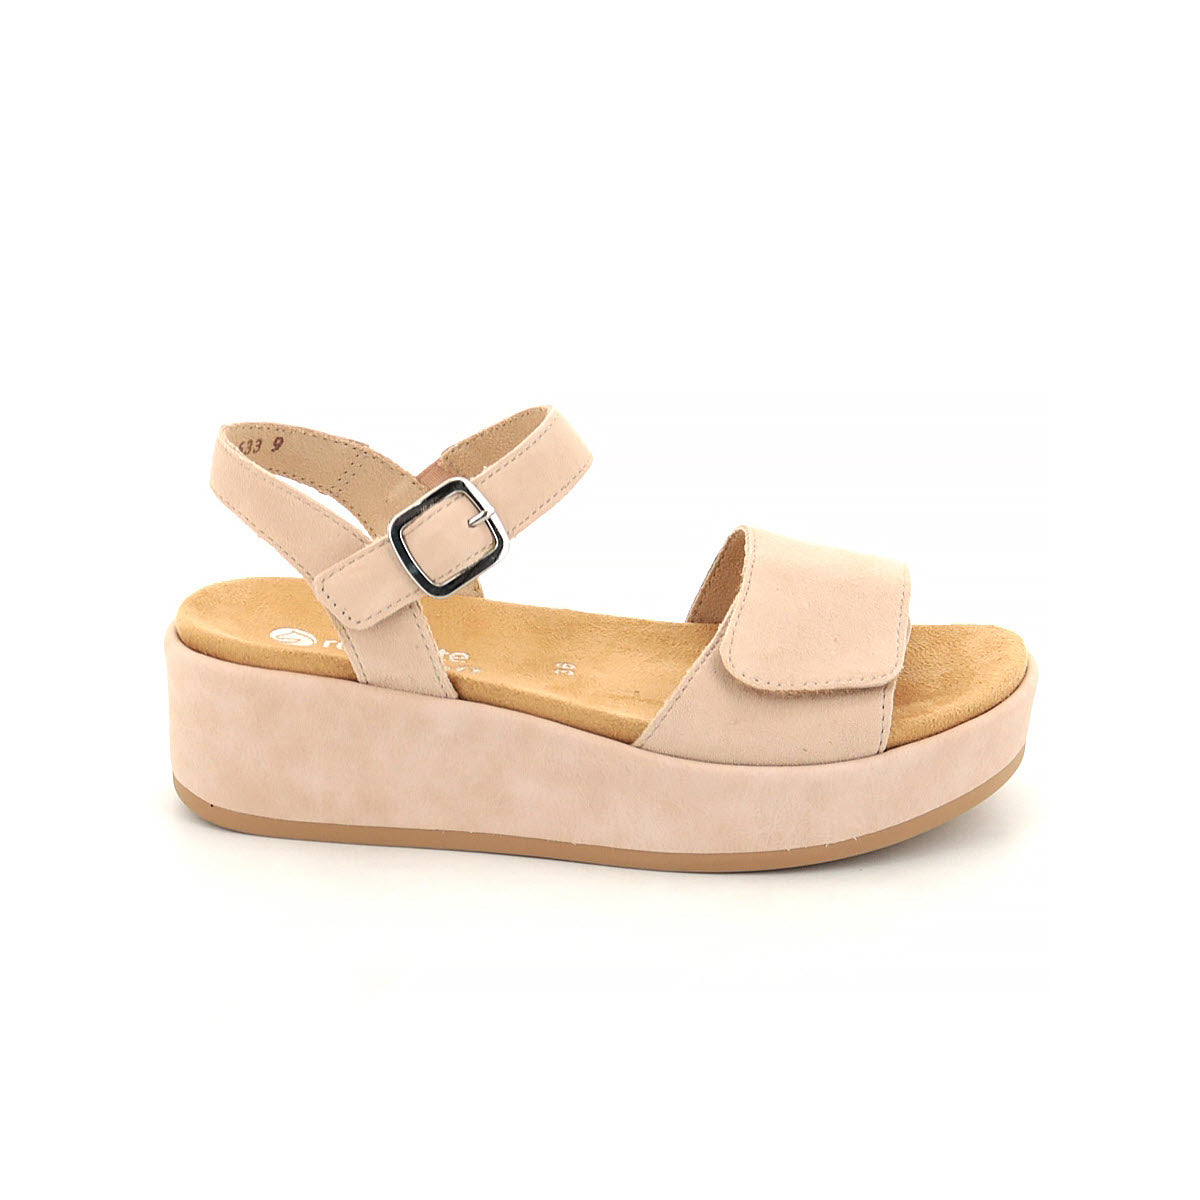 Remonte platform ankle strap sandal in blush, featuring a breathable microvelour finish, a buckle strap, and a cork sole, isolated on a white background.